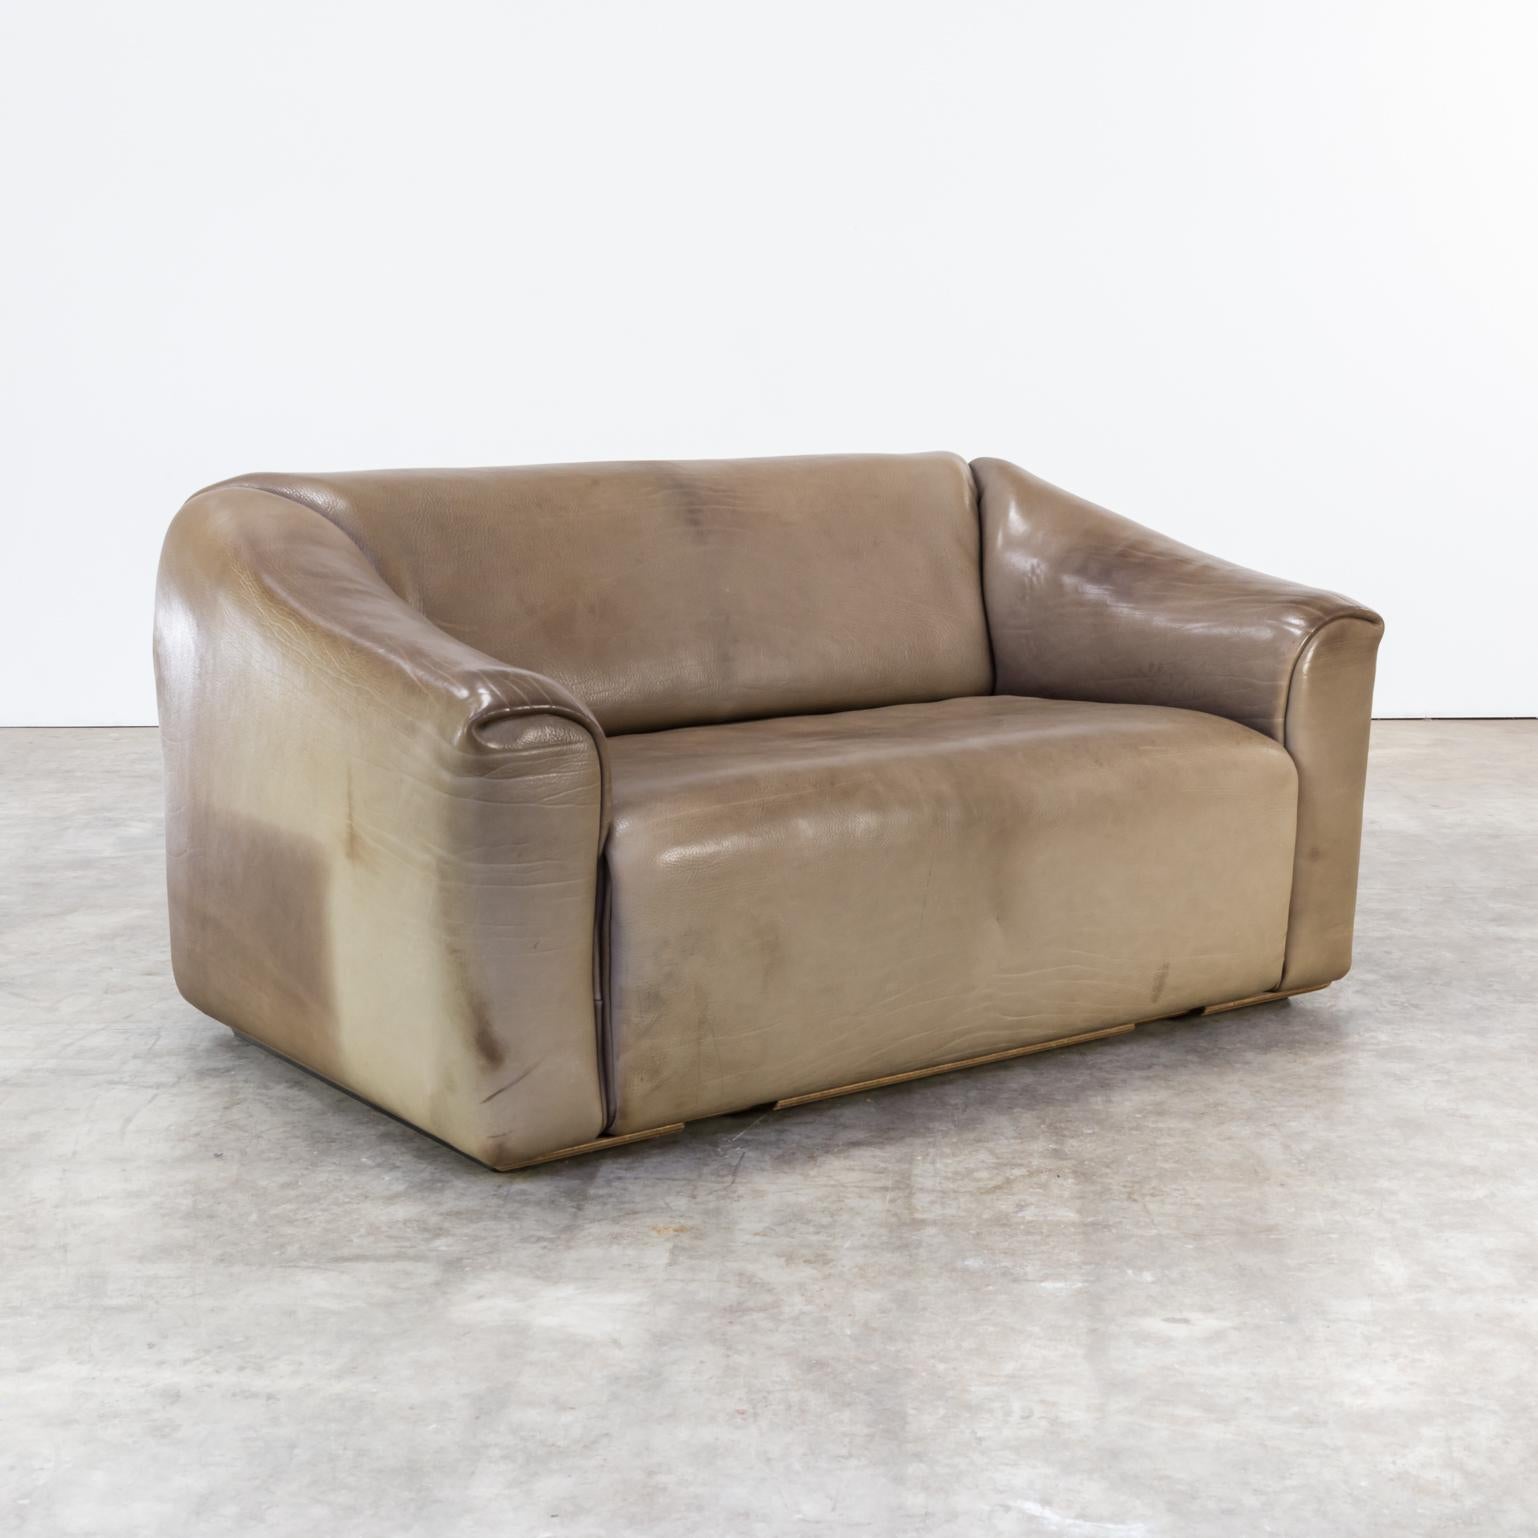 De Sede “DS47” Leather Two-Seat Sofa In Good Condition For Sale In Amstelveen, Noord